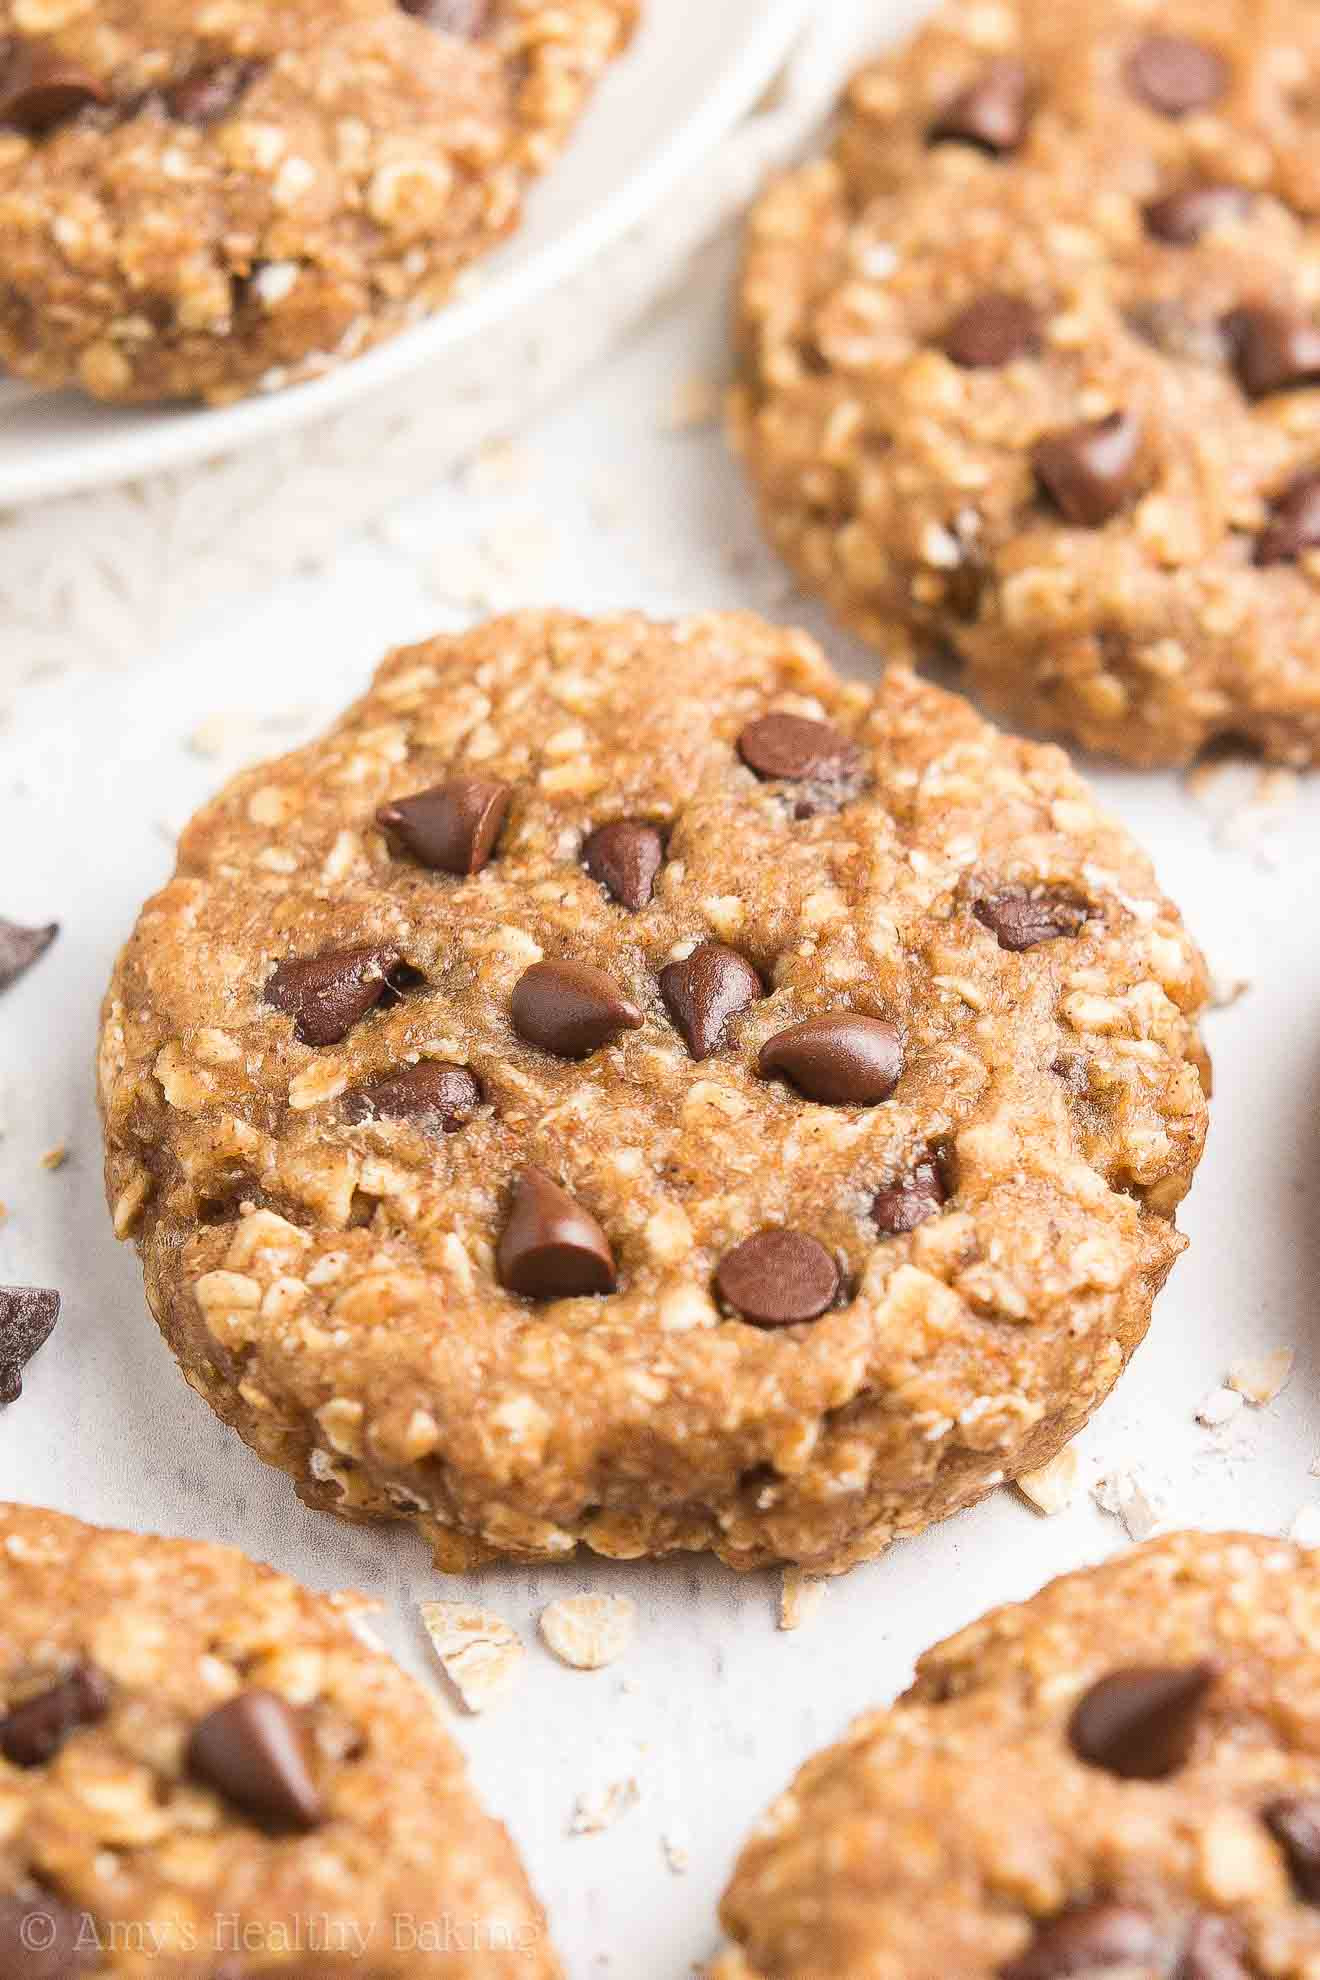 Healthy Oatmeal Peanut Butter Cookies
 healthy peanut butter oatmeal cookies